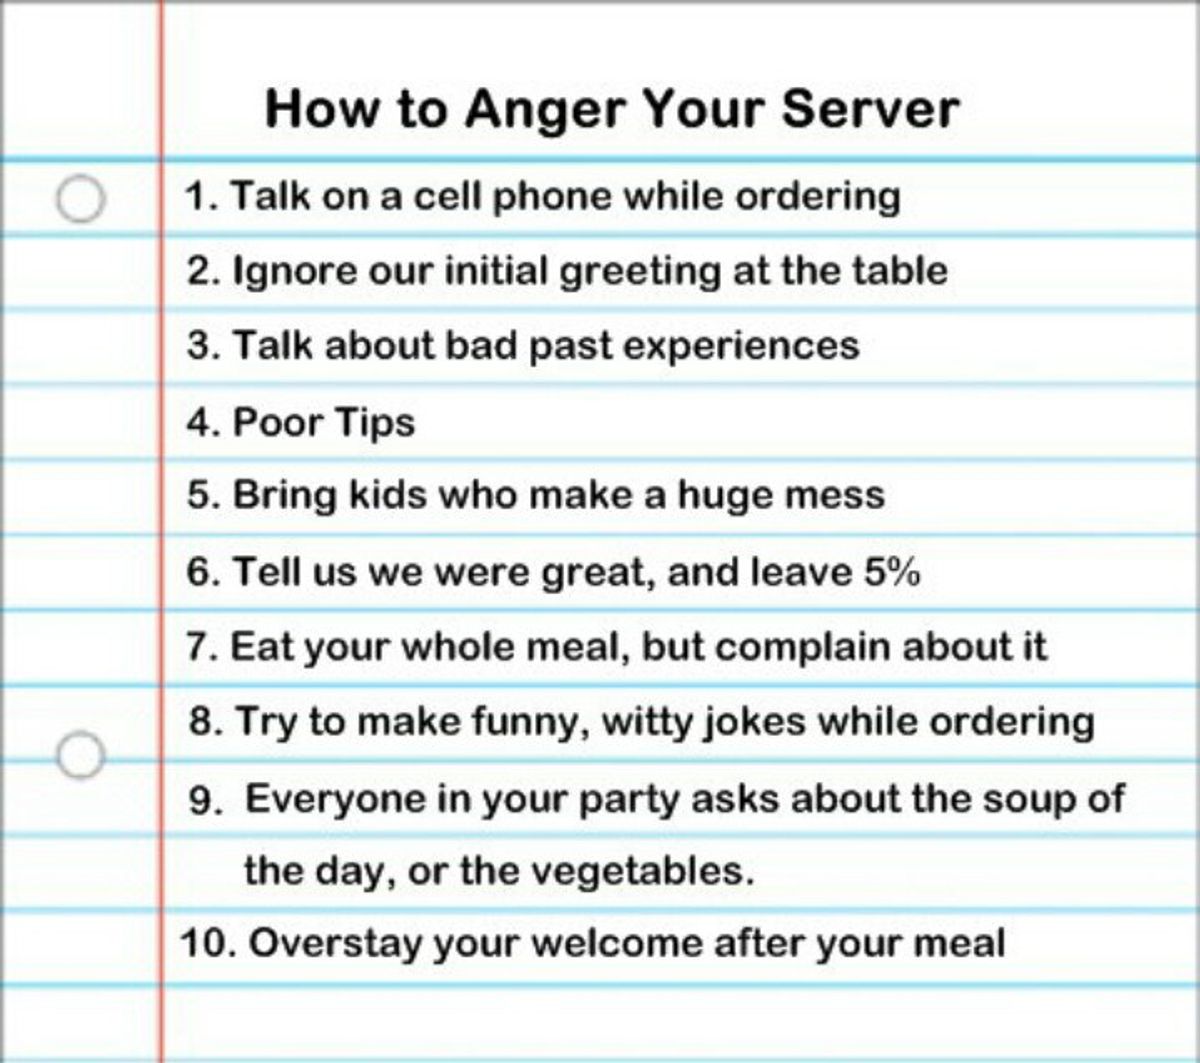 An Open Letter From Your Server